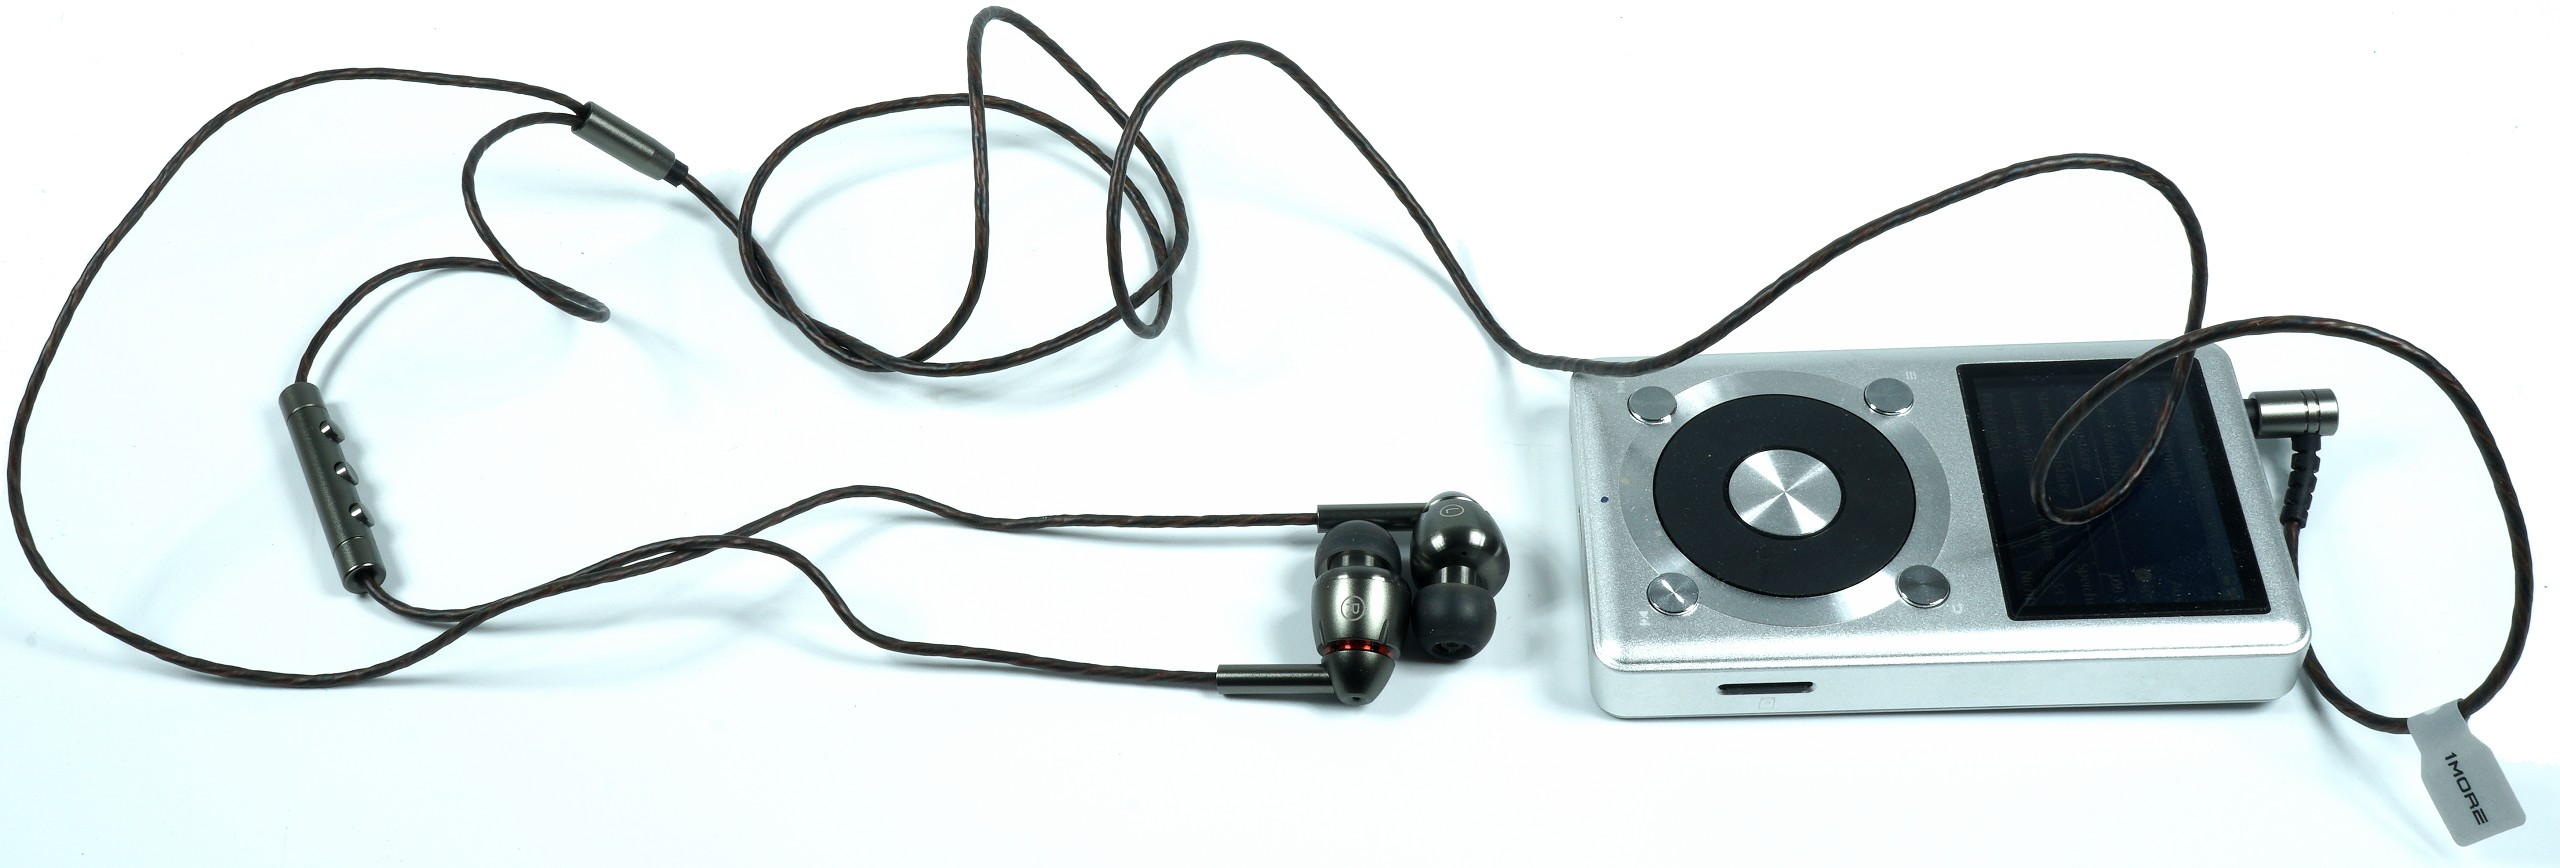 1More Quad Driver review - In-ears that are simply fun, igorsLAB